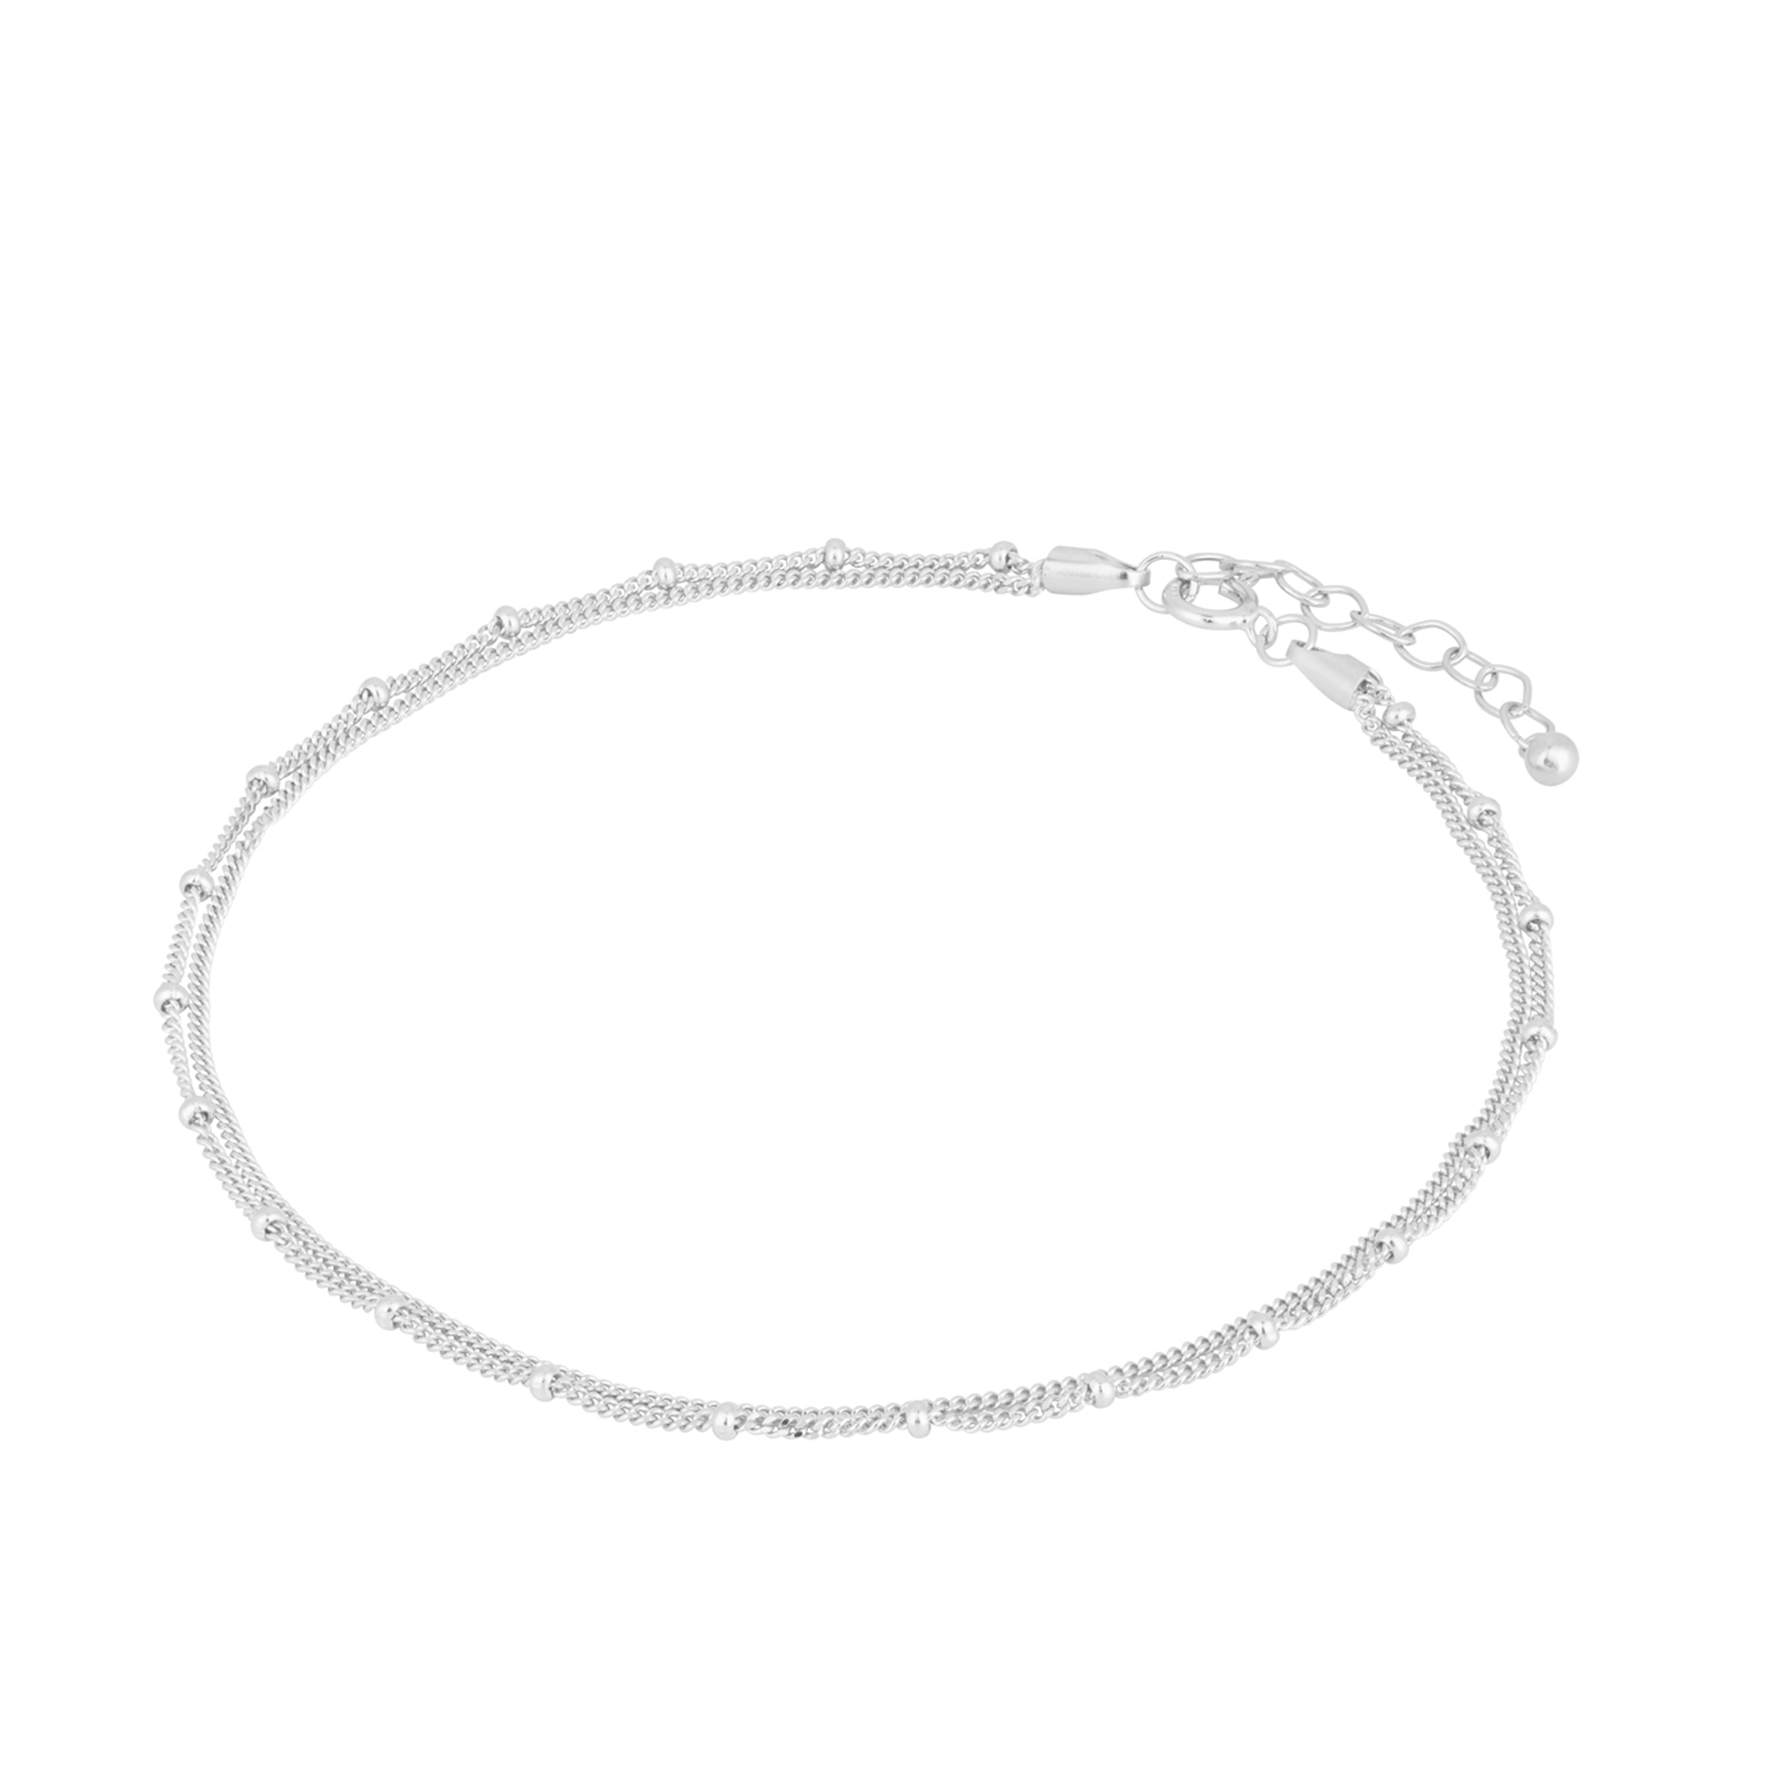 Galaxy Anklet from Pernille Corydon in Silver Sterling 925